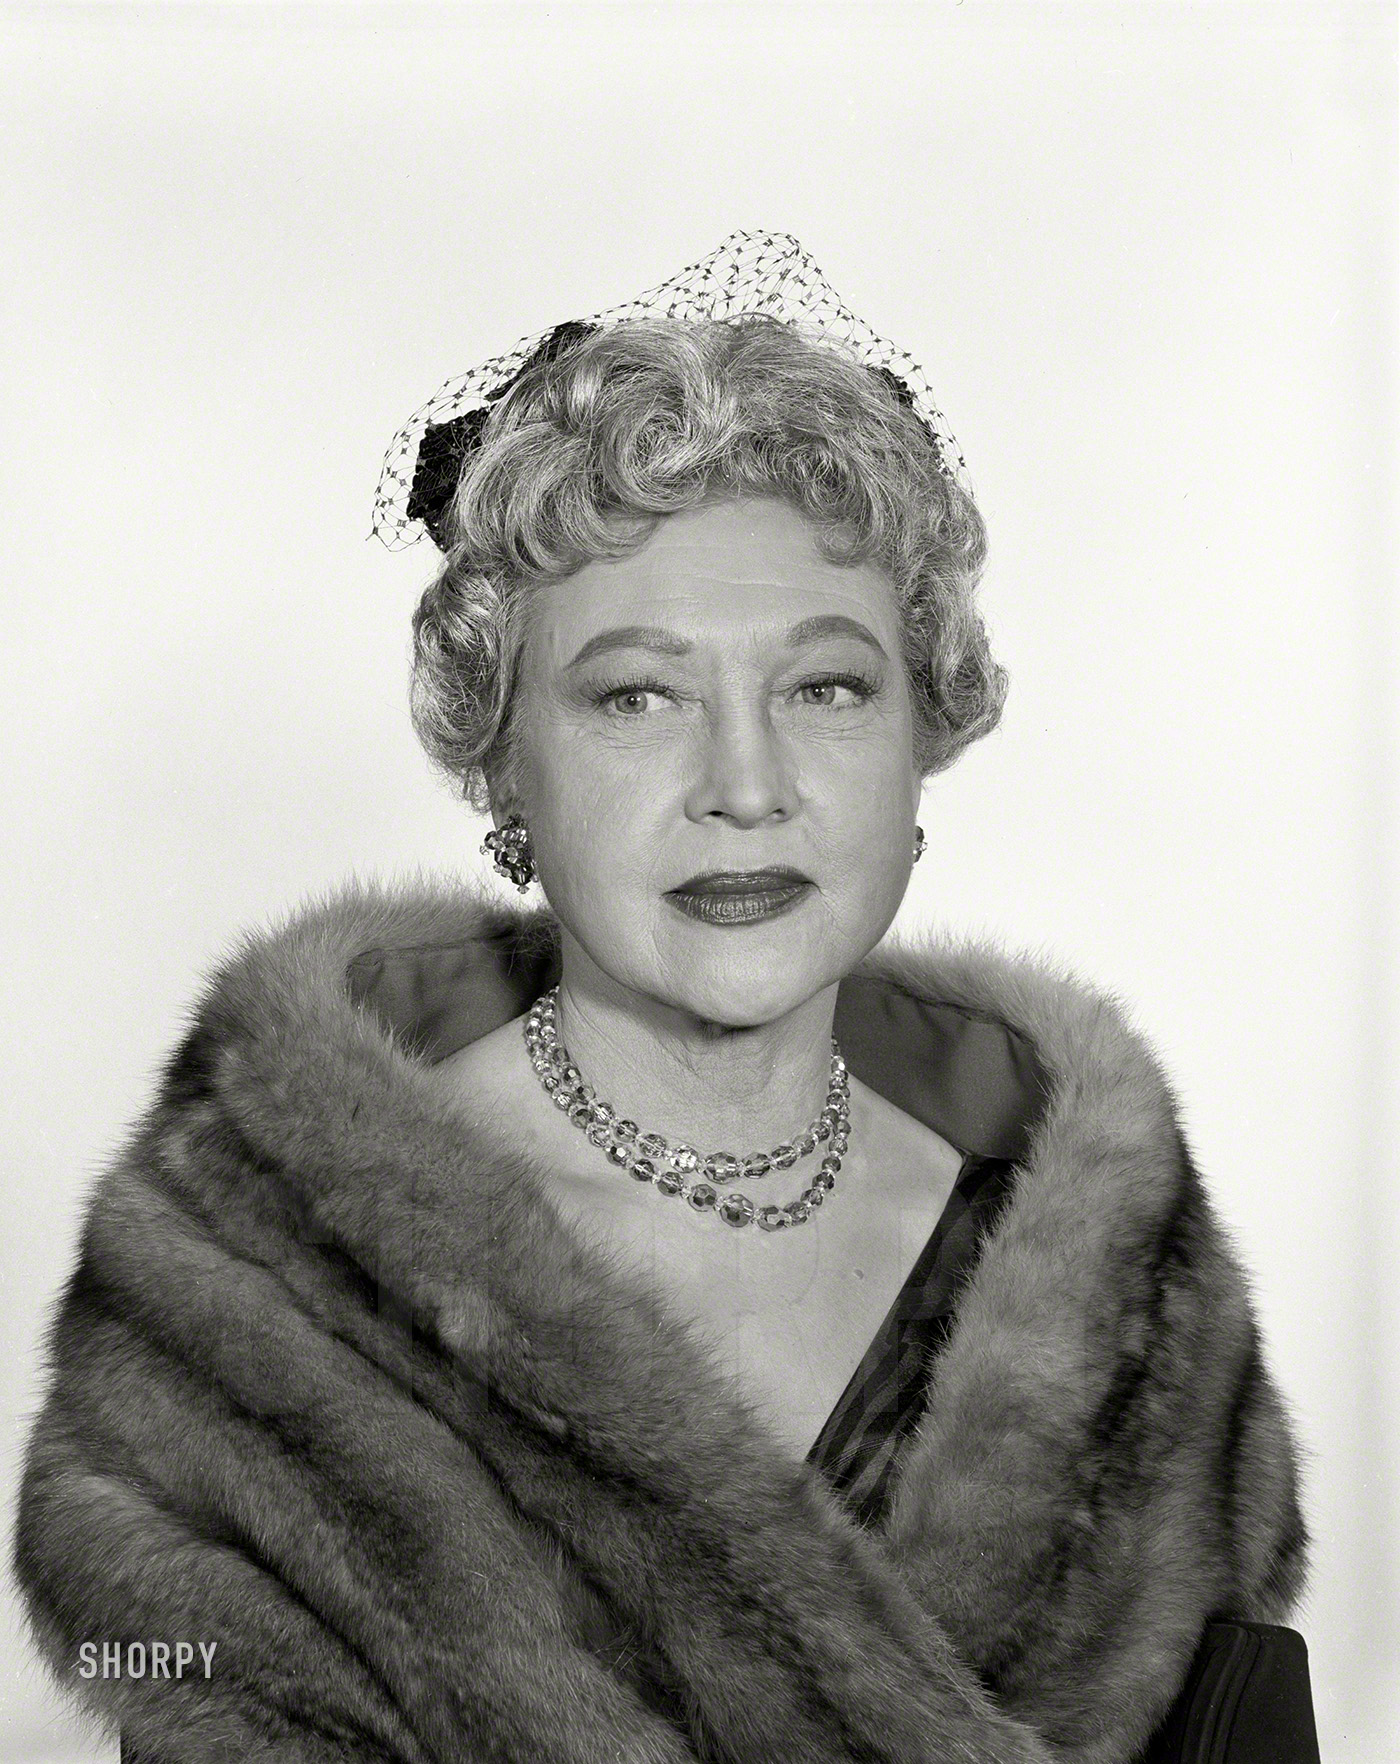 "Sexy actress Lurene Tuttle" is how the seller of this midcentury publicity still described its subject; "matronly character actor" might be more on the mark. For many years Lurene's voice was a fixture of the radio airwaves. 4x5 acetate negative from the Publicity Department Archive. View full size.